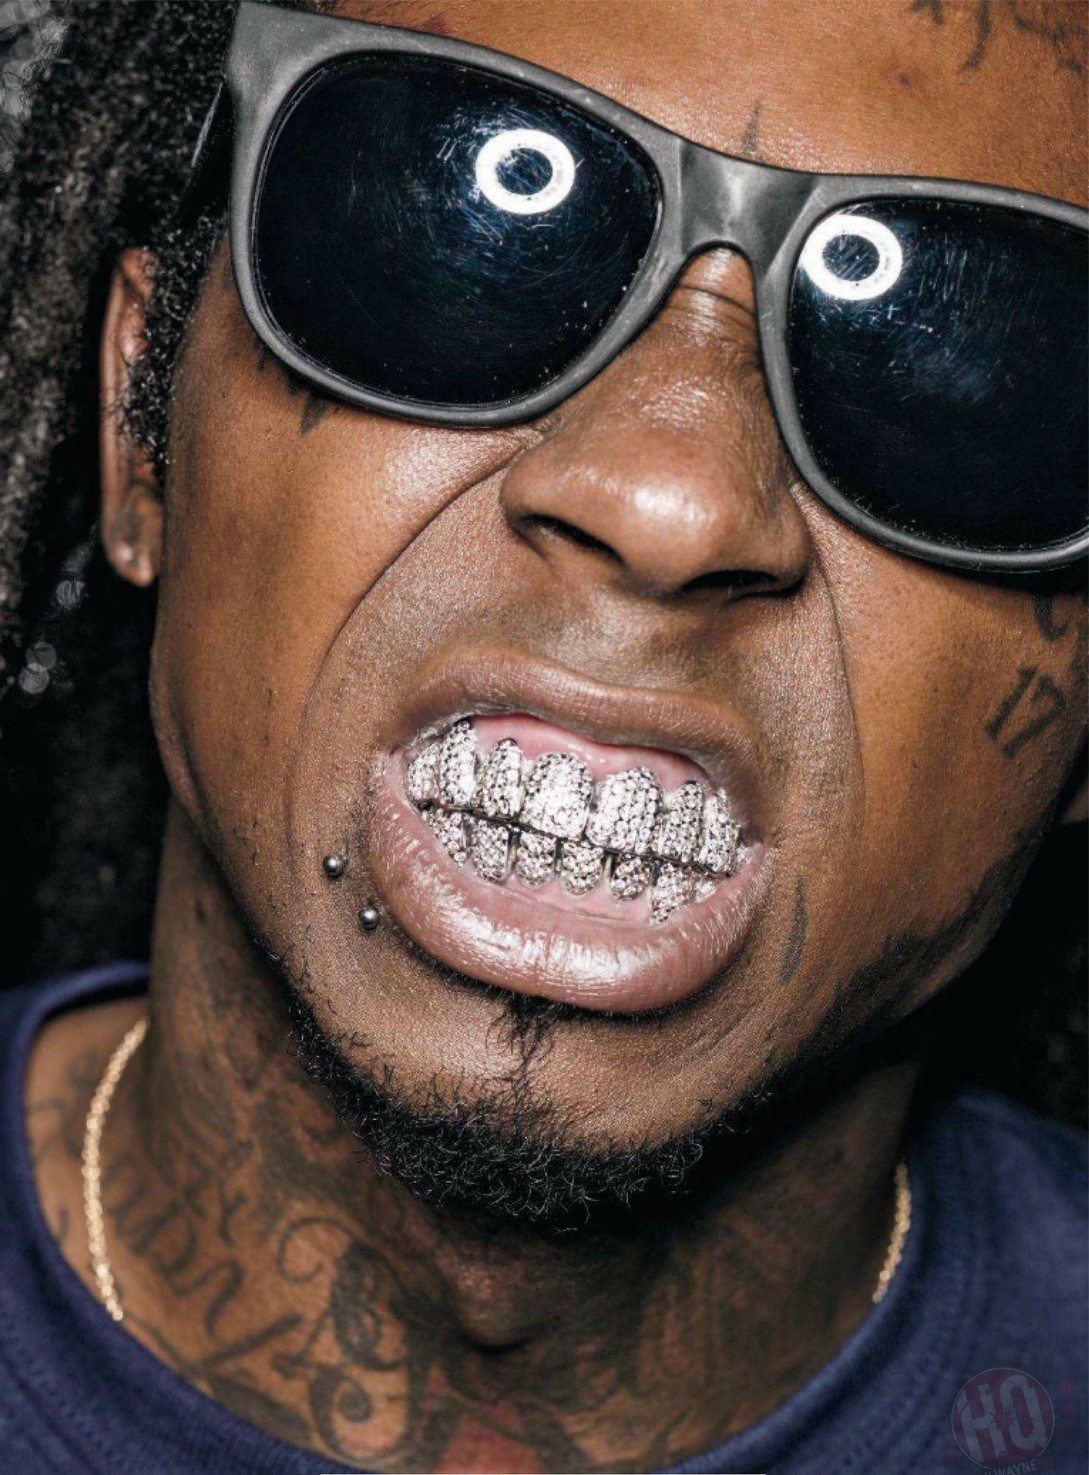 How Much Does Lil Wayne Teeth Cost Teethwalls from heightline.com. 